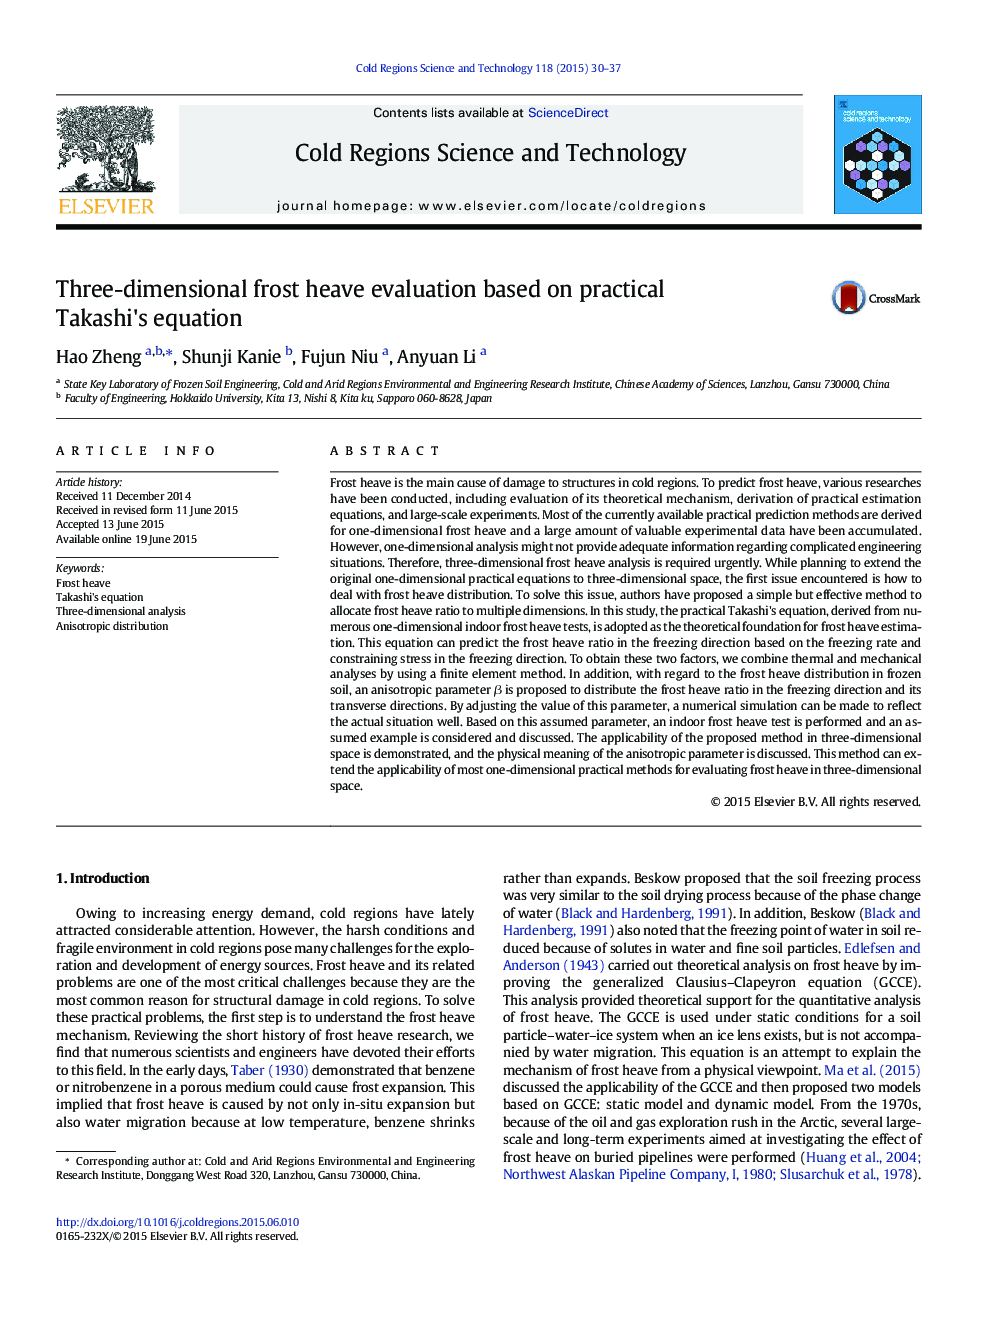 Three-dimensional frost heave evaluation based on practical Takashi's equation